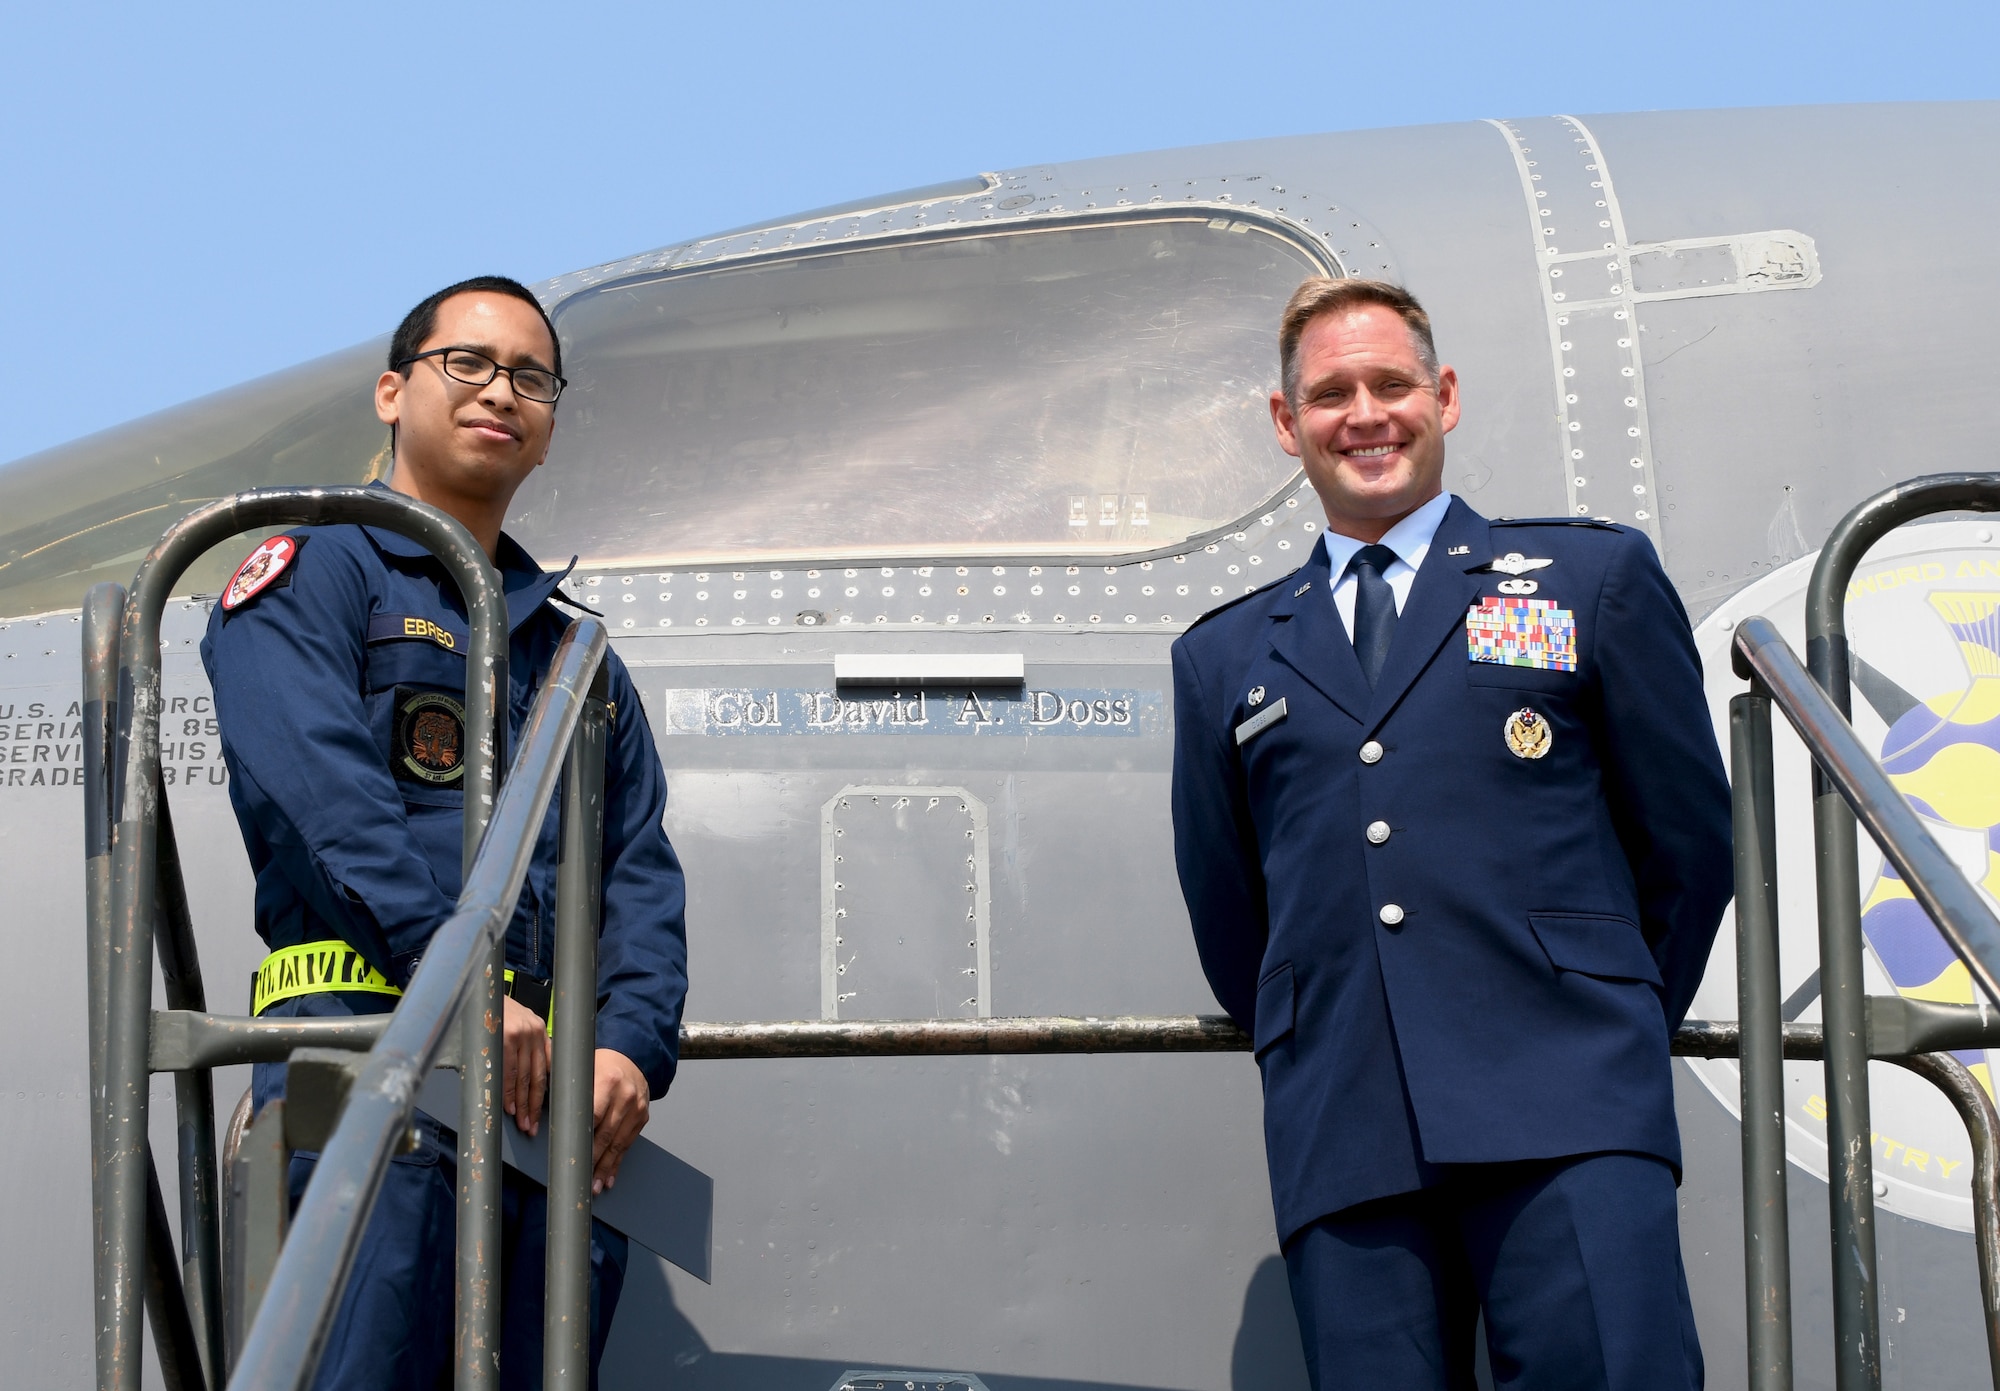 Airman 1st Class Marofrancesco Ebreo, a 28th Aircraft Maintenance Squadron dedicated crew chief, stands alongside Col. David A. Doss, the 28th Bomb Wing commander, during a name reveal on a B-1B Lancer at Ellsworth Air Force Base., S.D., May 30, 2019.  Doss is a master navigator successfully completing more than 2,500 flight hours, including 380 in combat. (U.S. Air Force photo by Airman 1st Class Christina Bennett)